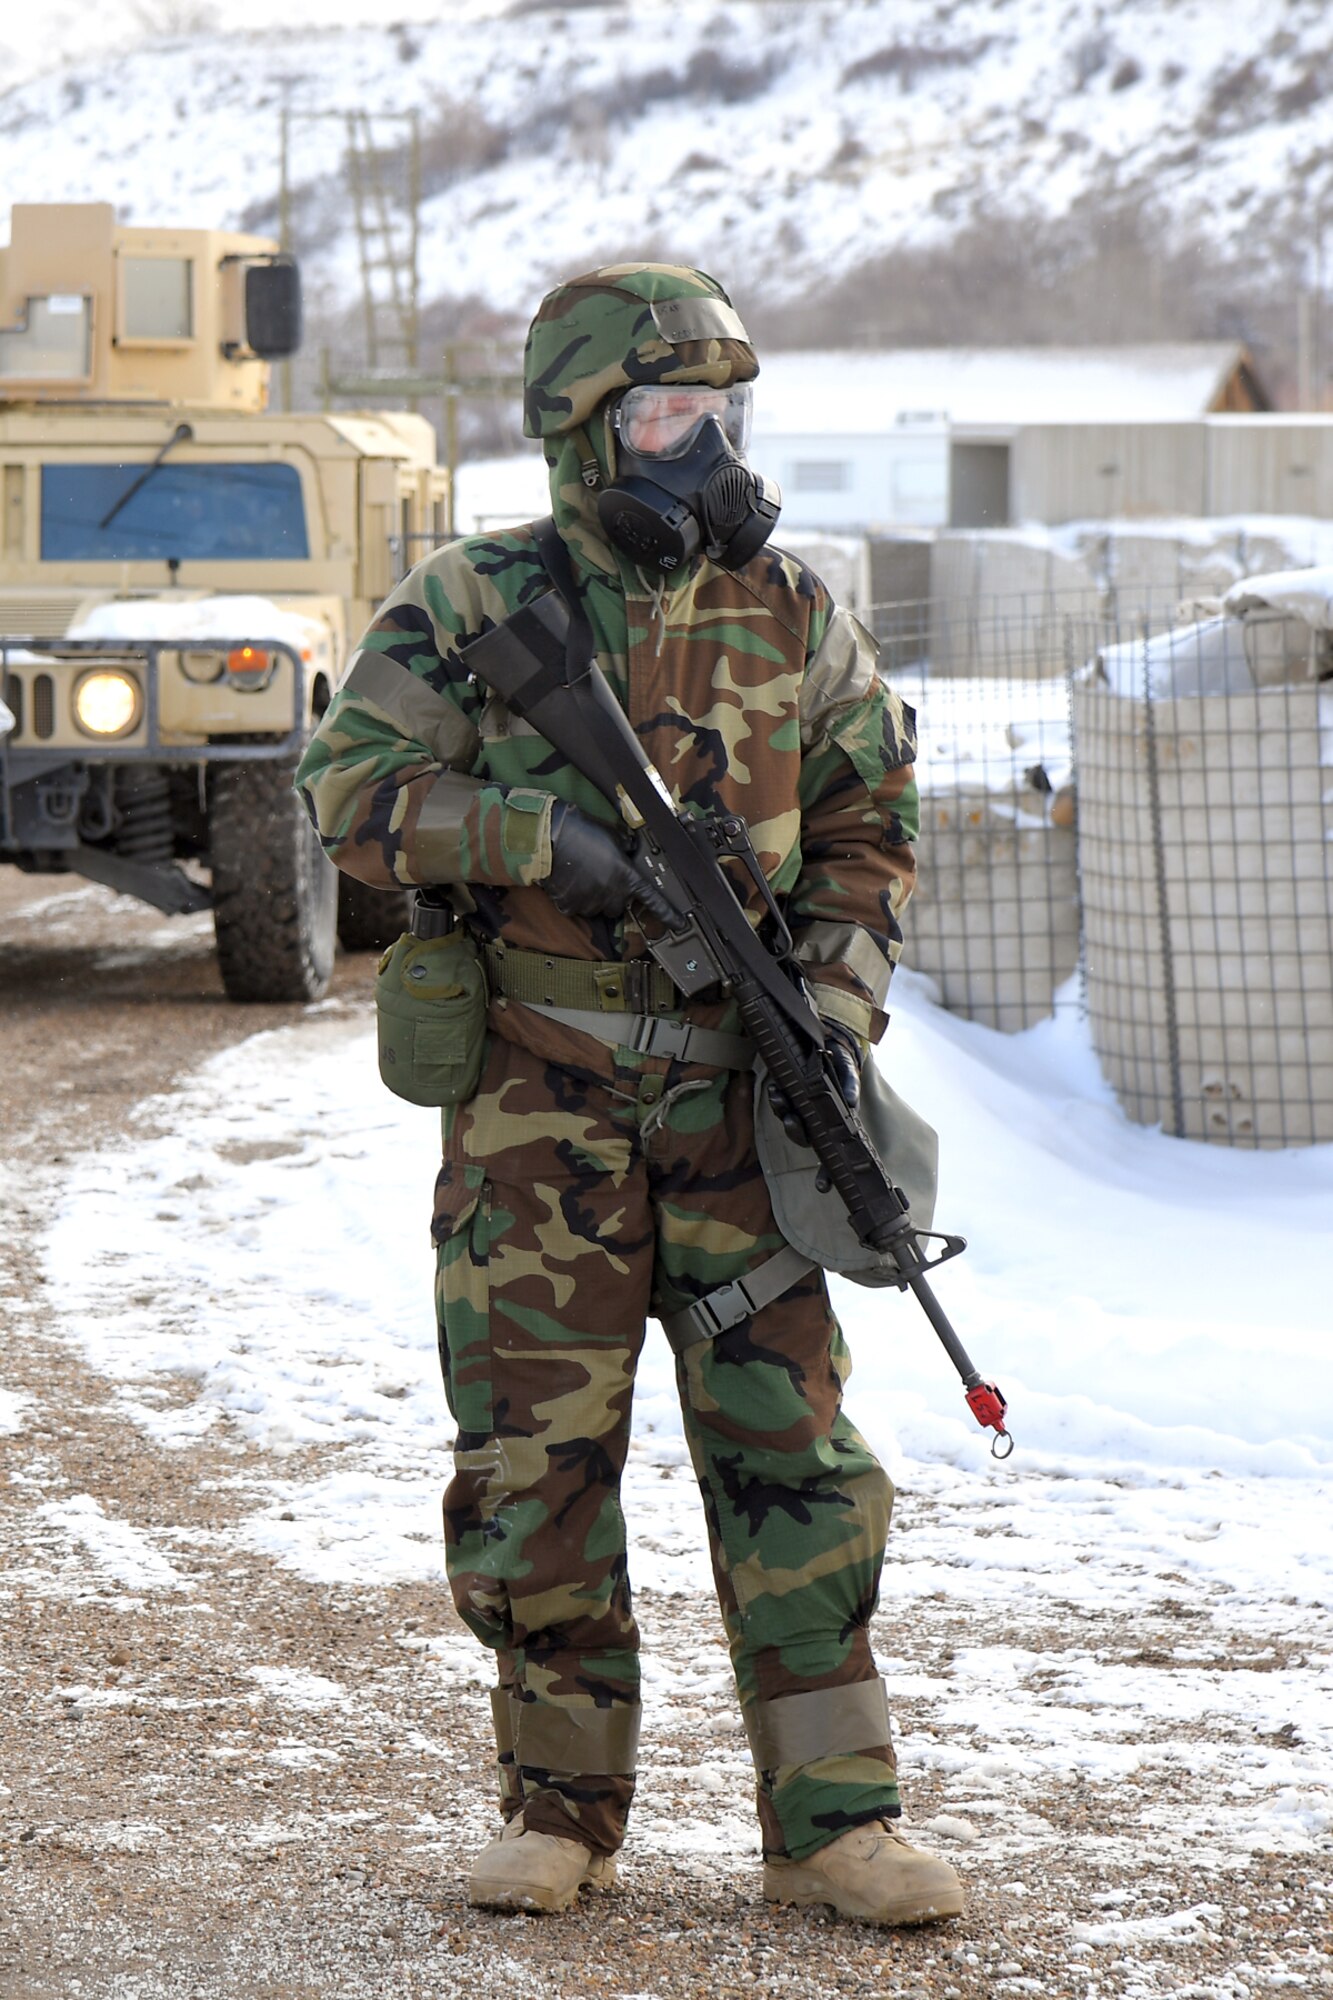 An Airman provides security during a readiness exercise, Feb. 7, 2019, at Hill Air Force Base, Utah. During the exercise, Airmen donned mission-oriented projective posture, or MOPP, gear and were assessed on performing different tasks in a simulated toxic environment to improve their operational readiness. (U.S. Air Force photo by Todd Cromar)